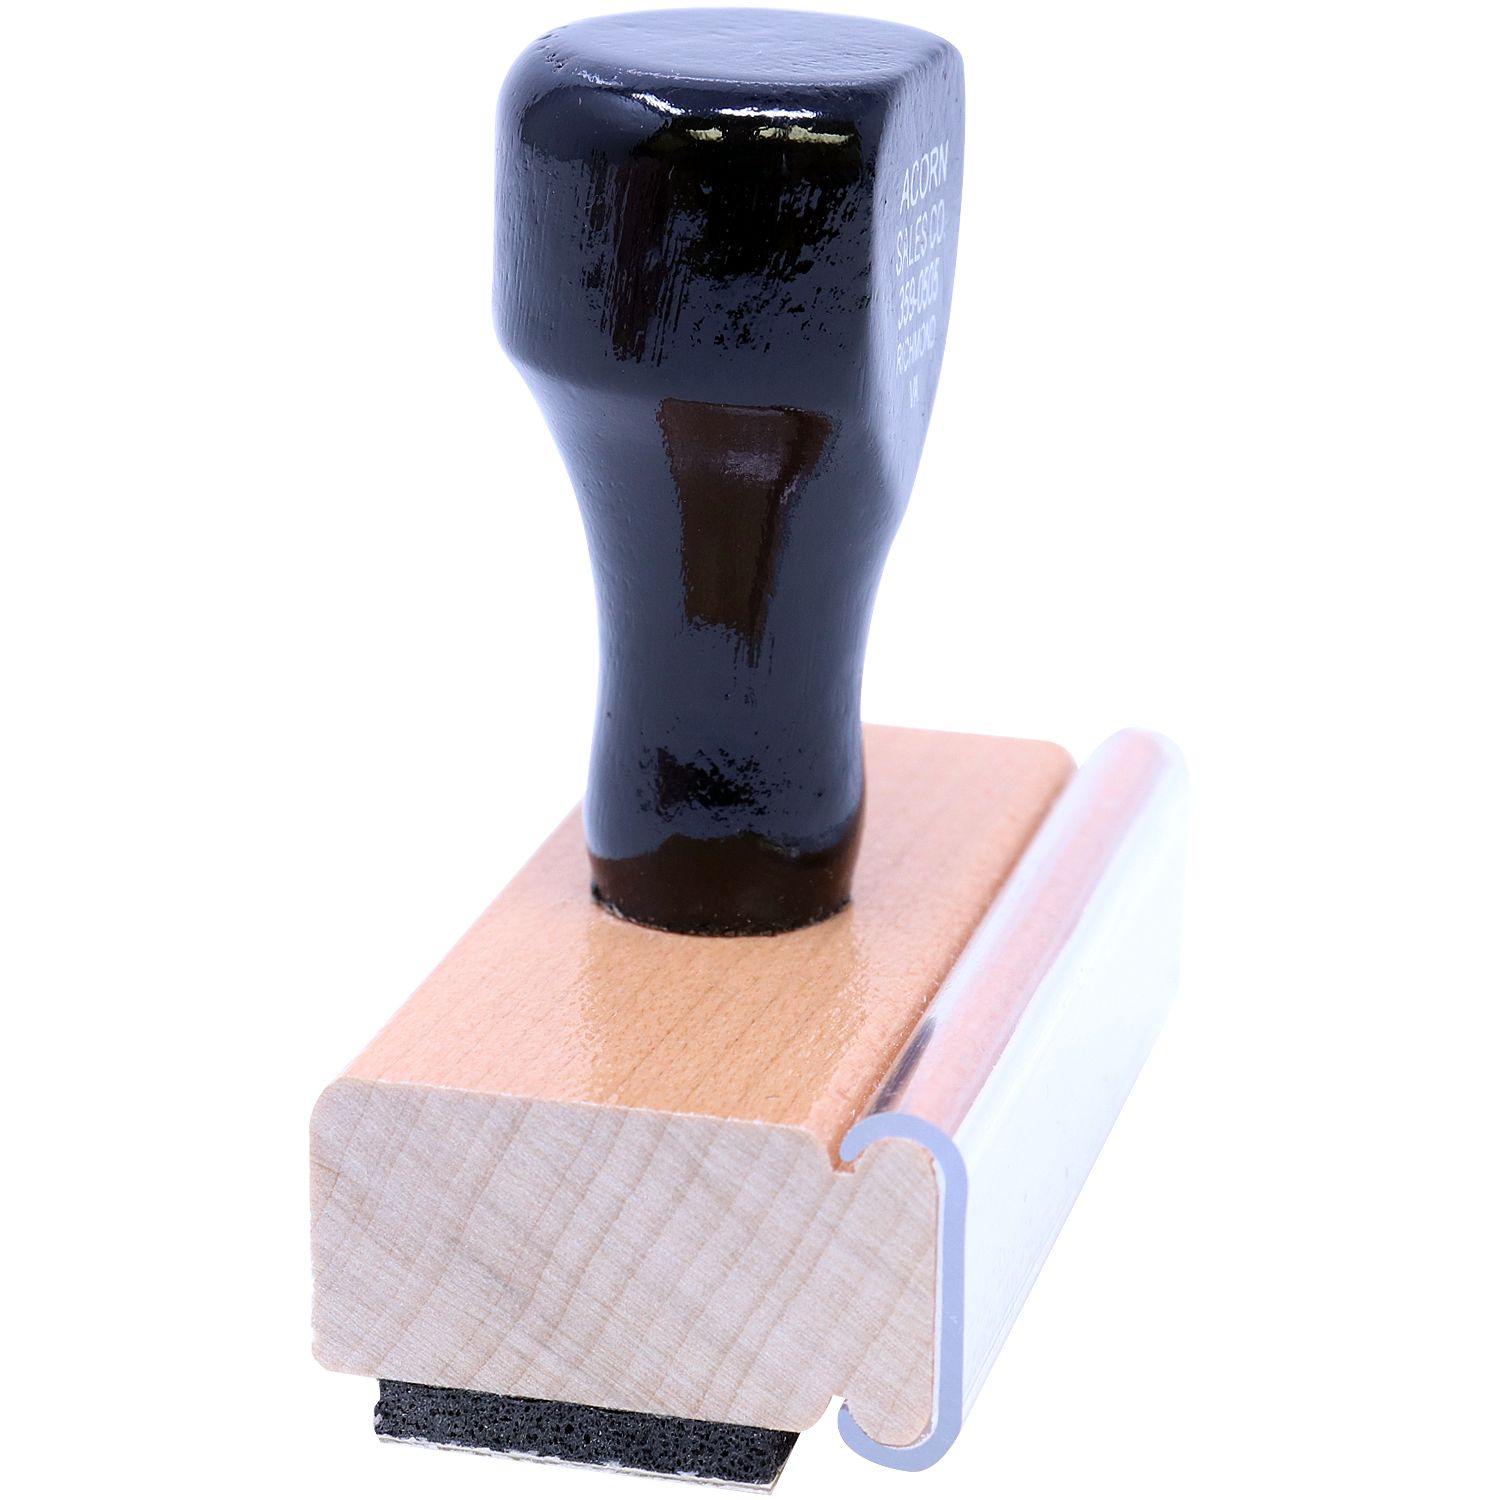 Side View of Large Narrow Font Confidential Rubber Stamp at an Angle